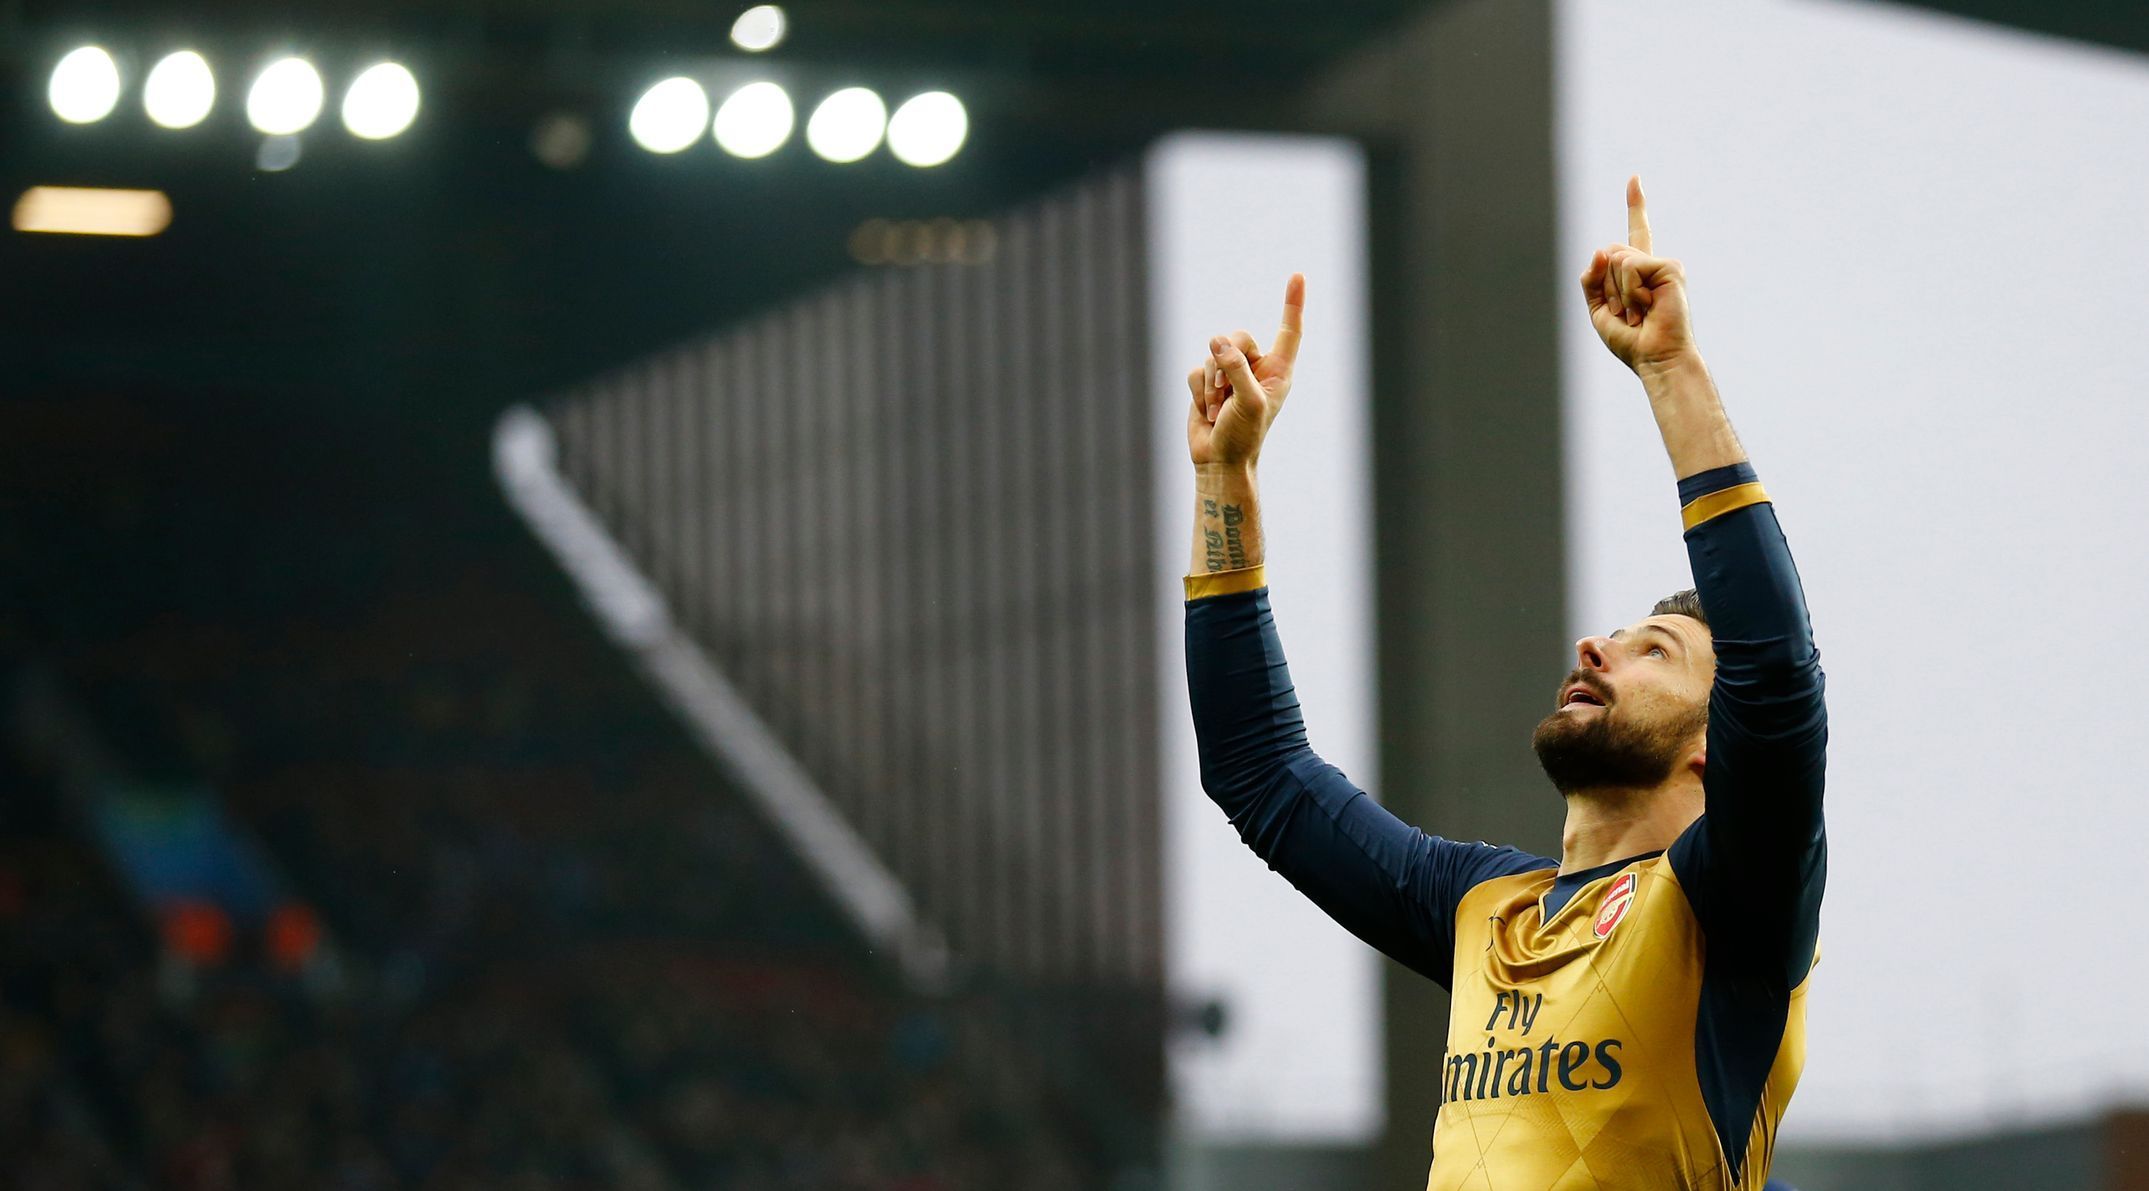 Olivier Giroud celebrates after scoring the first goal for Arsenal from the penalty spot